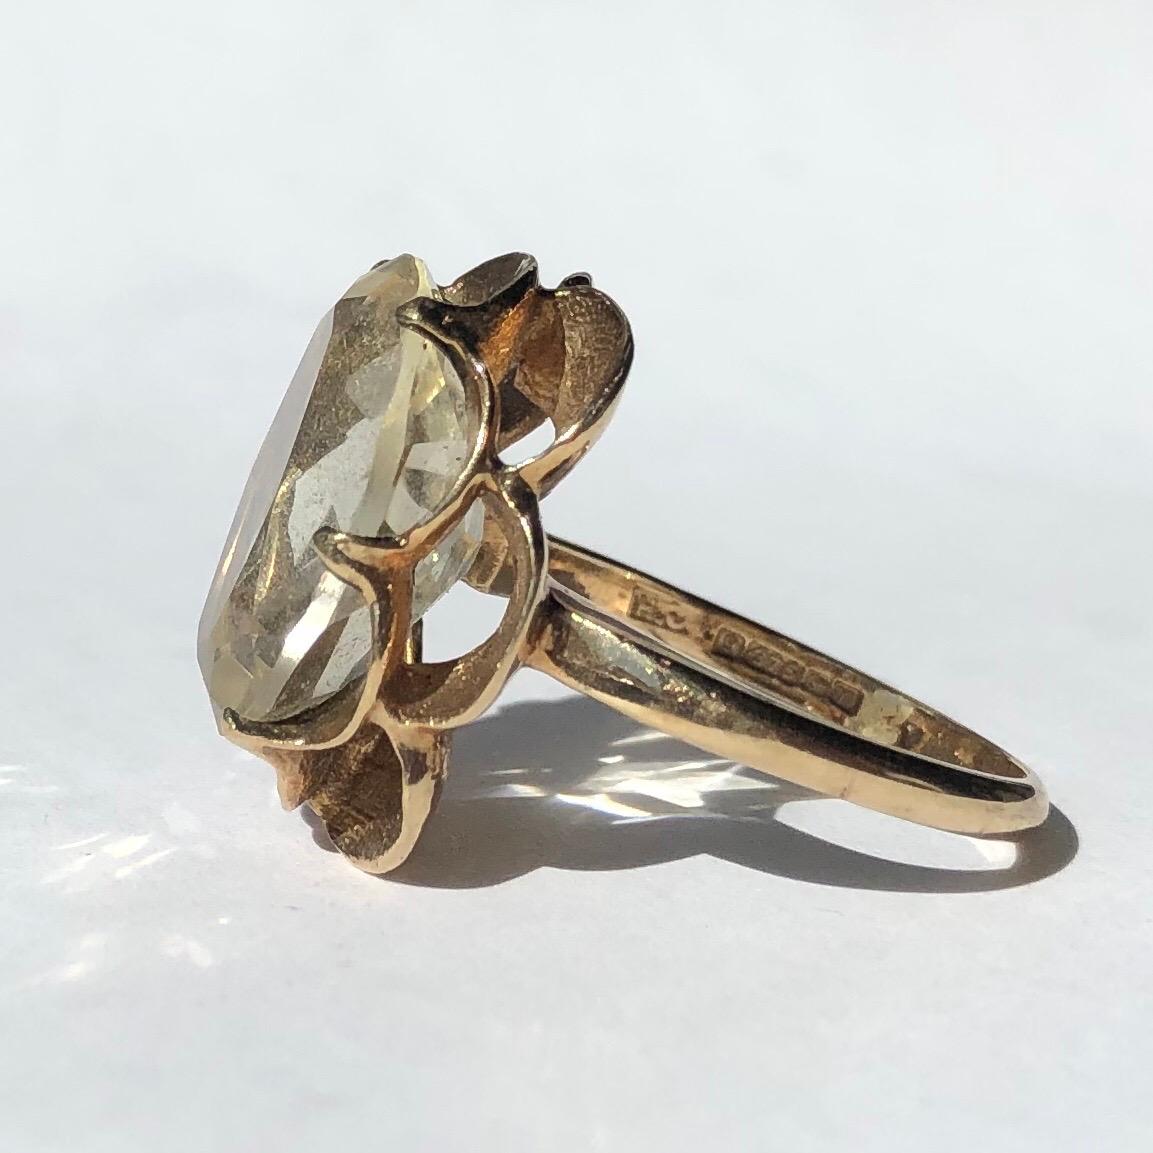 This decorative citrine ring is modelled in 9ct gold. The citrine stone is pale in colour and sits in a scalloped double row setting. 

Size: N or 6 3/4
Stone Dimensions: 16x 12.5mm 
Height Off Finger: 8mm 

Weight: 5.79g